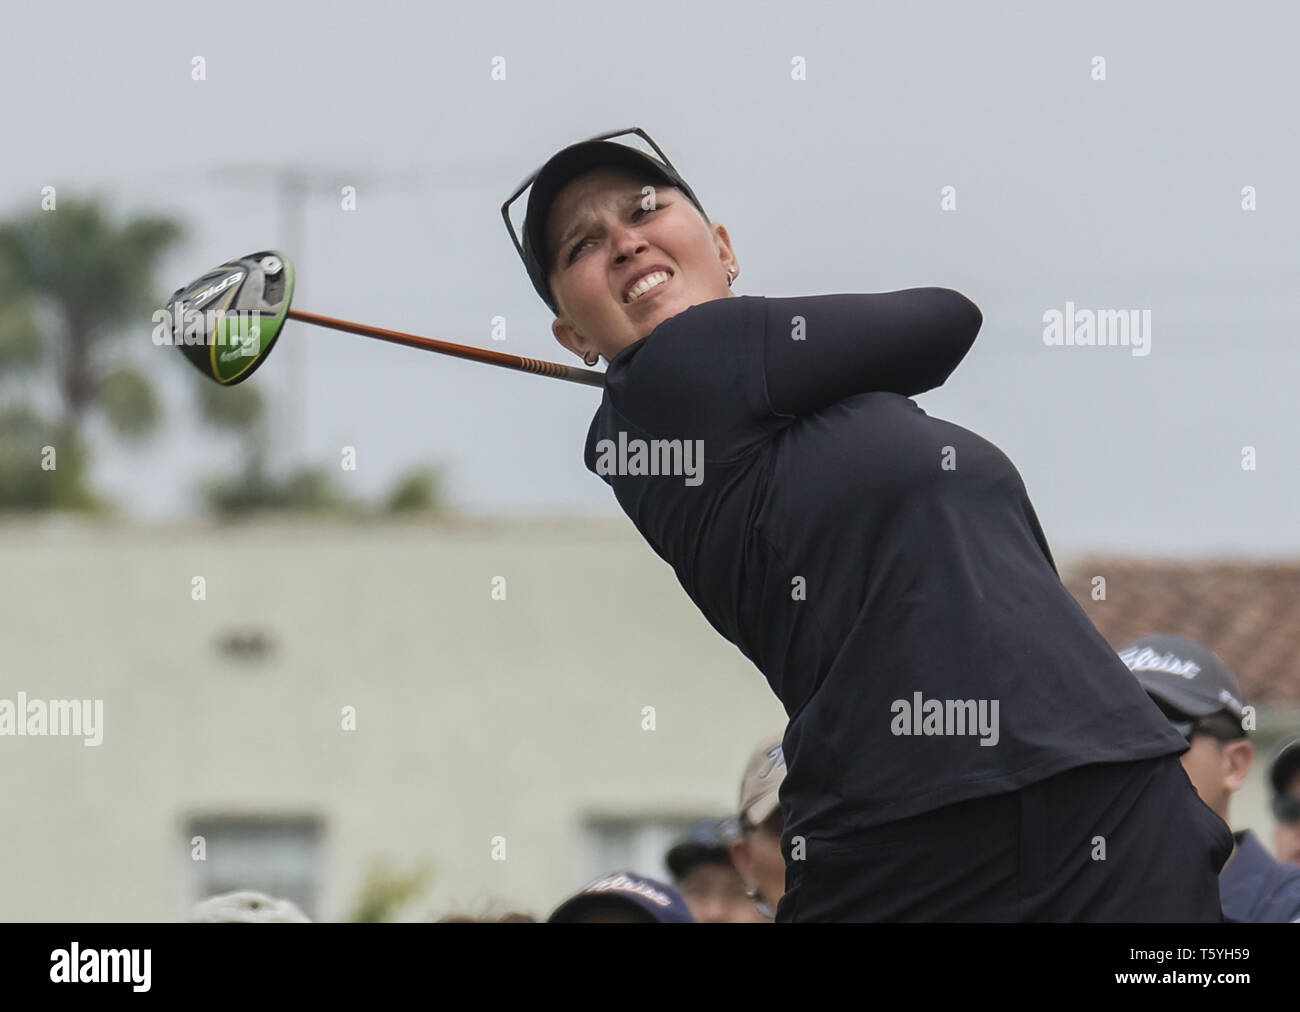 Los Angeles, California, USA. 27th Apr, 2019. Nanna Koerstz Madsen of Denmark in actions during the third round of the HUGEL-AIR PREMIA LA Open LPGA golf tournament at Wilshire Country on April 27, 2019, in Los Angeles. Credit: Ringo Chiu/ZUMA Wire/Alamy Live News Stock Photo